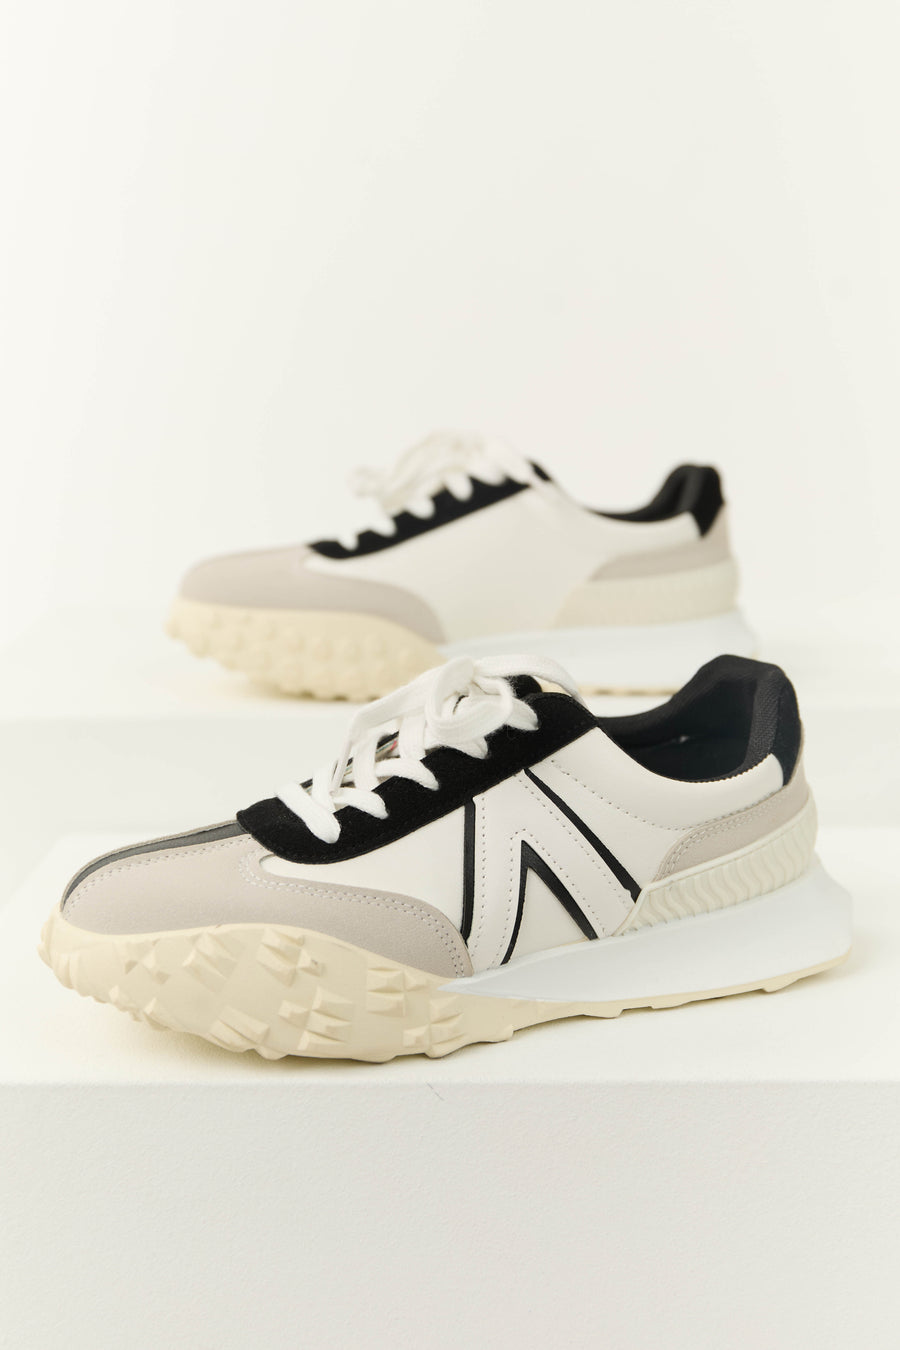 Off White and Black Lace Up Fashion Sneakers